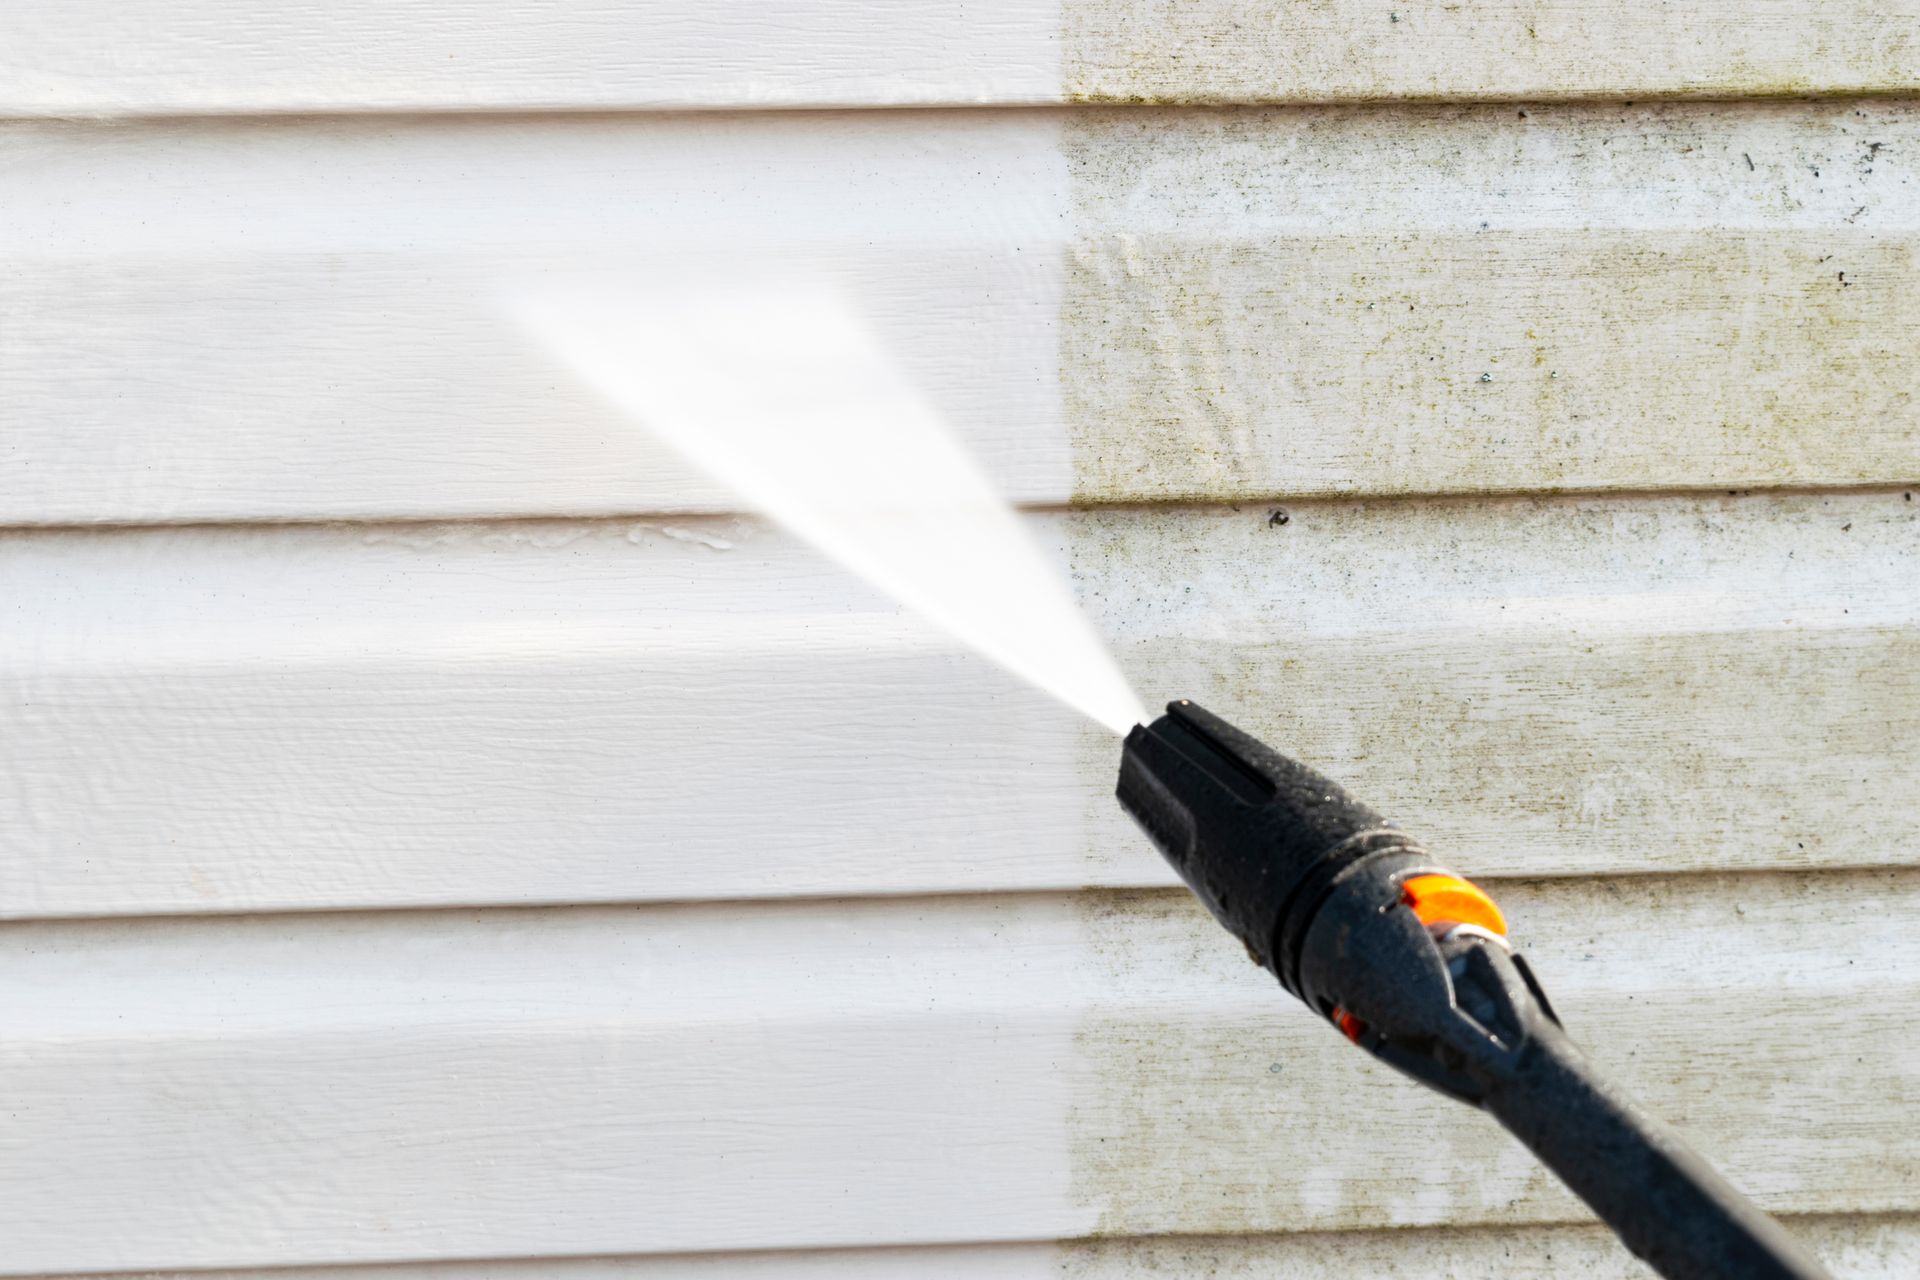 A professional using high-pressure water jets to clean the building facade.